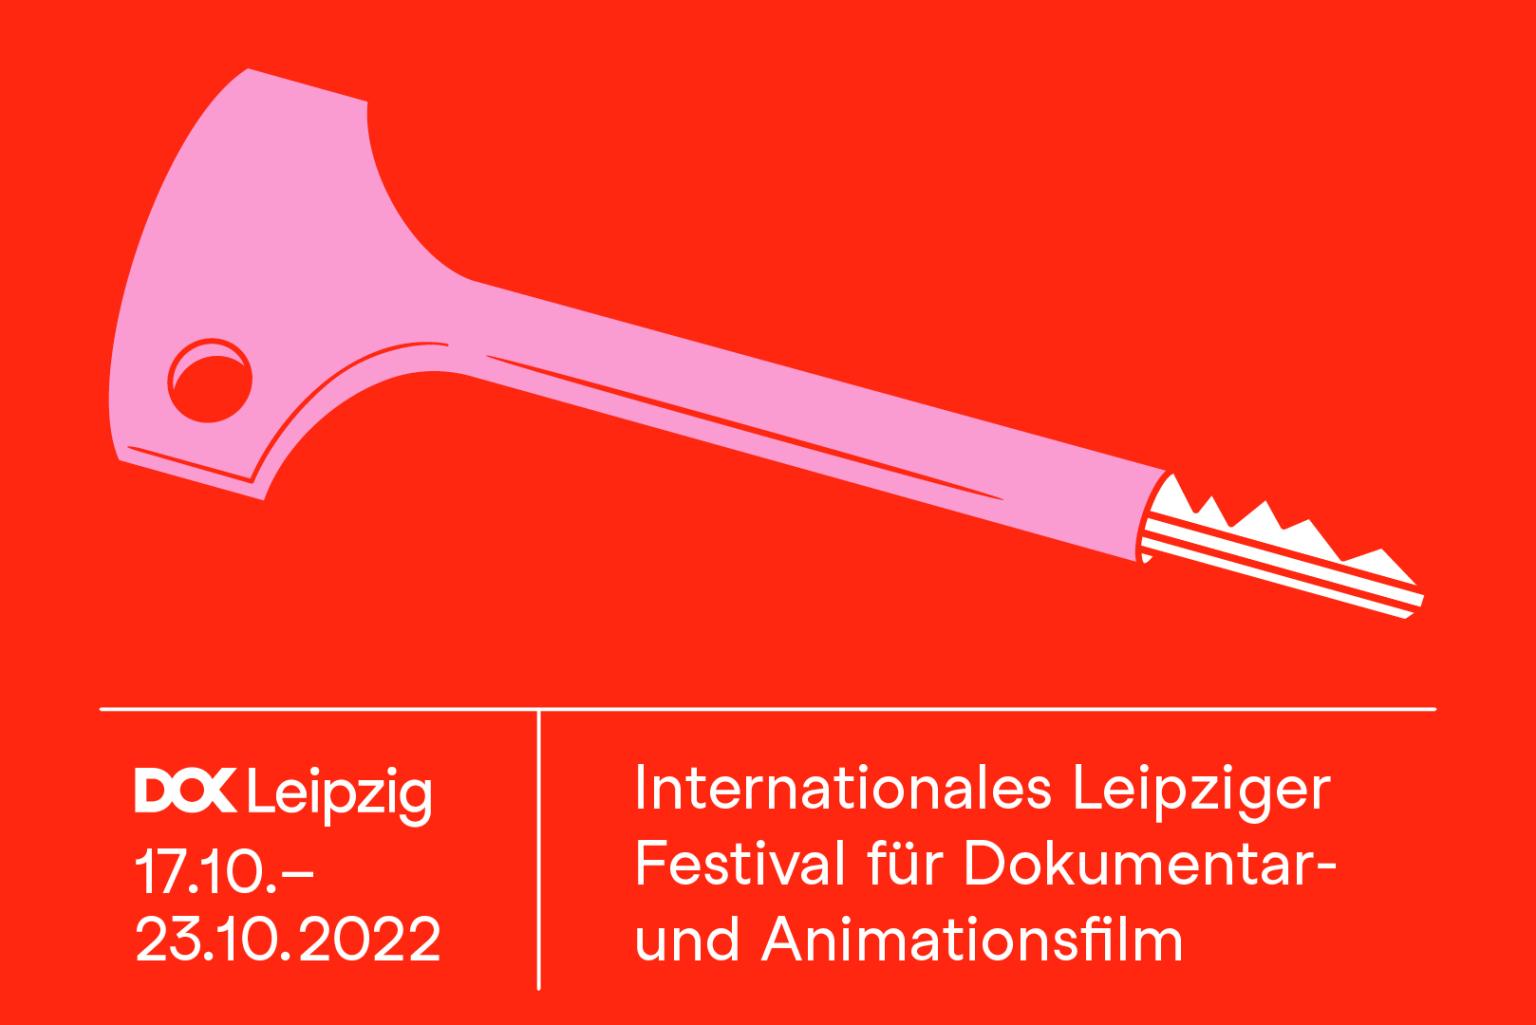 The festival’s key visual shows a classic key to a GDR apartment in pink on a red background.